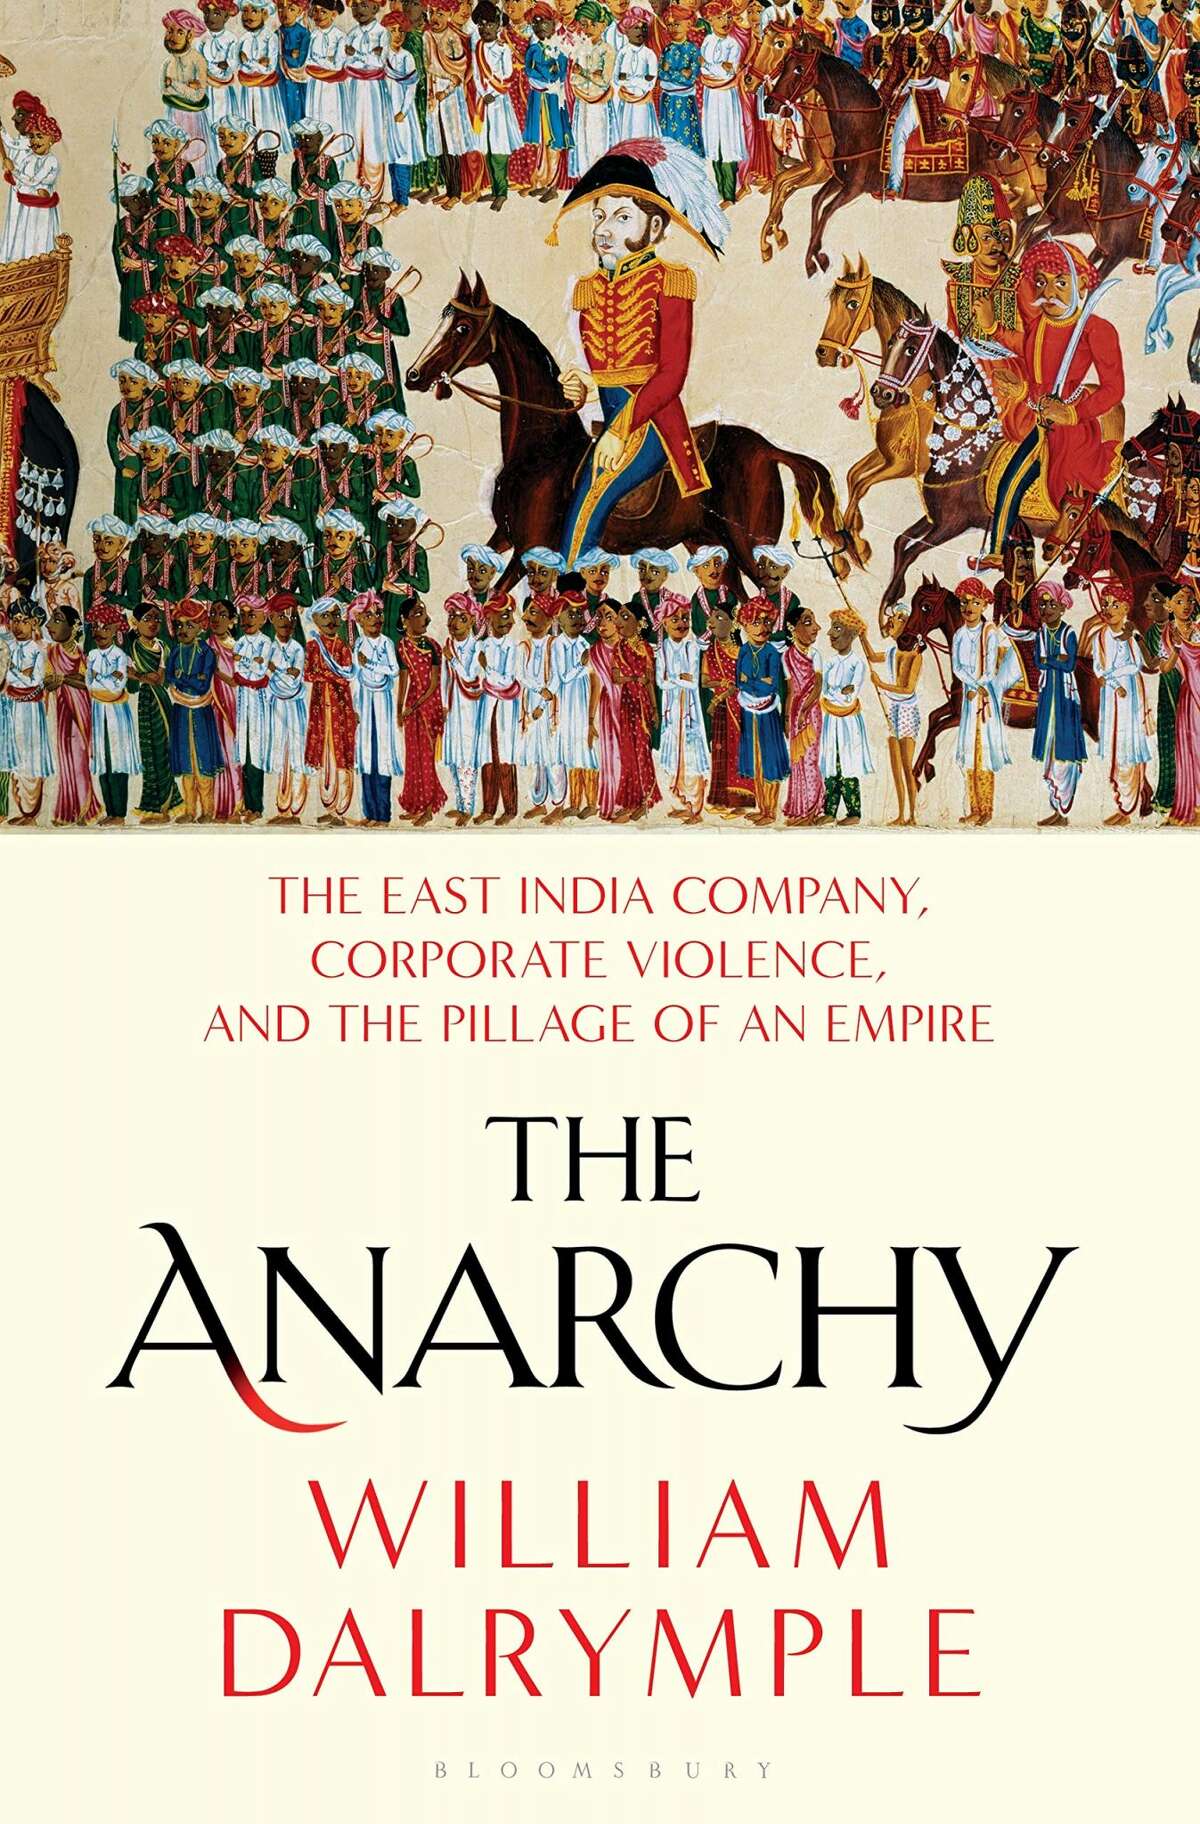 "The Anarchy: The Relentless Rise of the East India Company" by William Dalrymple